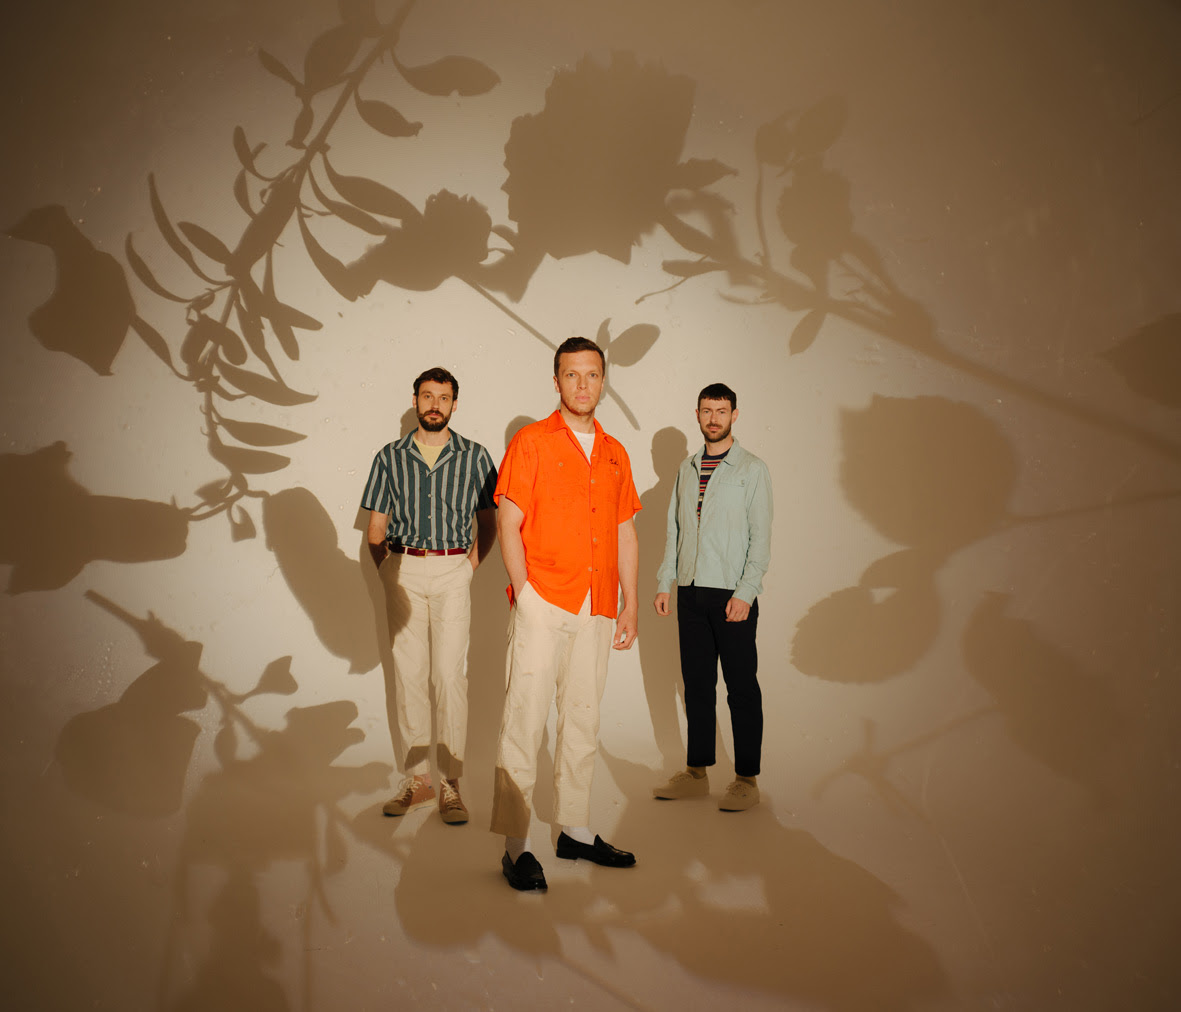 Promo image of Friendly Fires for Silhouettes single